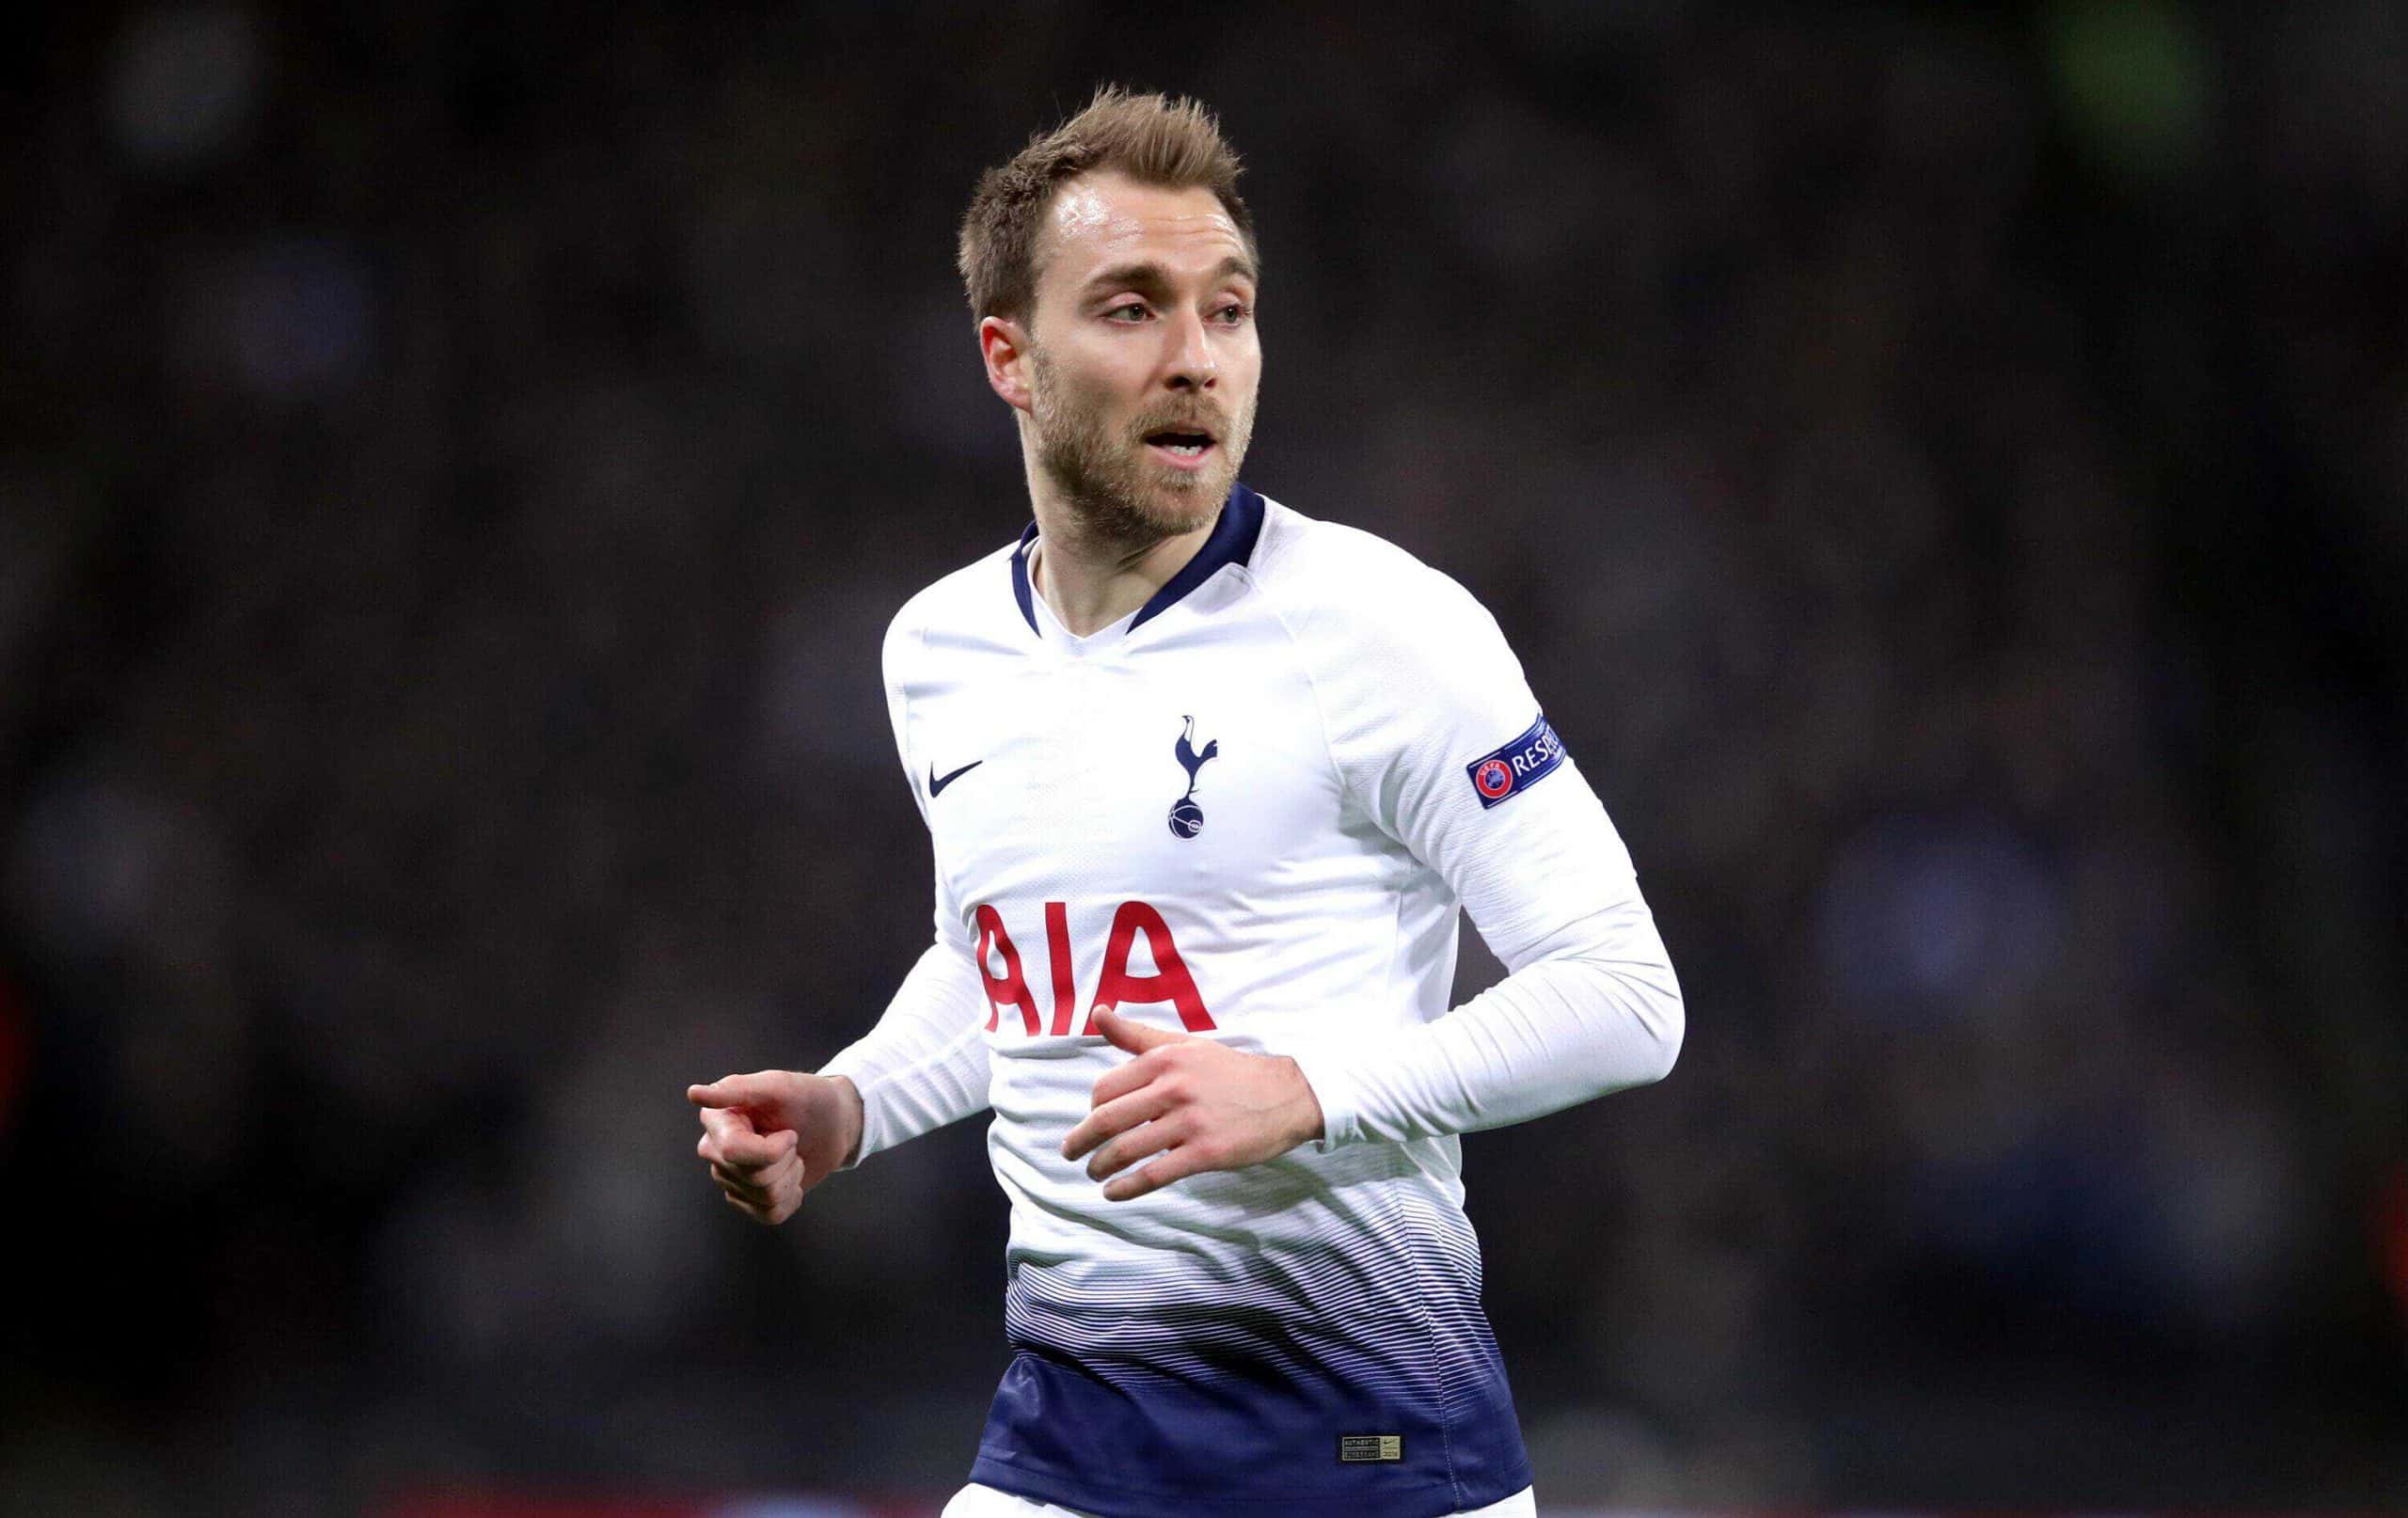 ‘Definitely my hardest time right now at Tottenham’ – Spurs star opens up